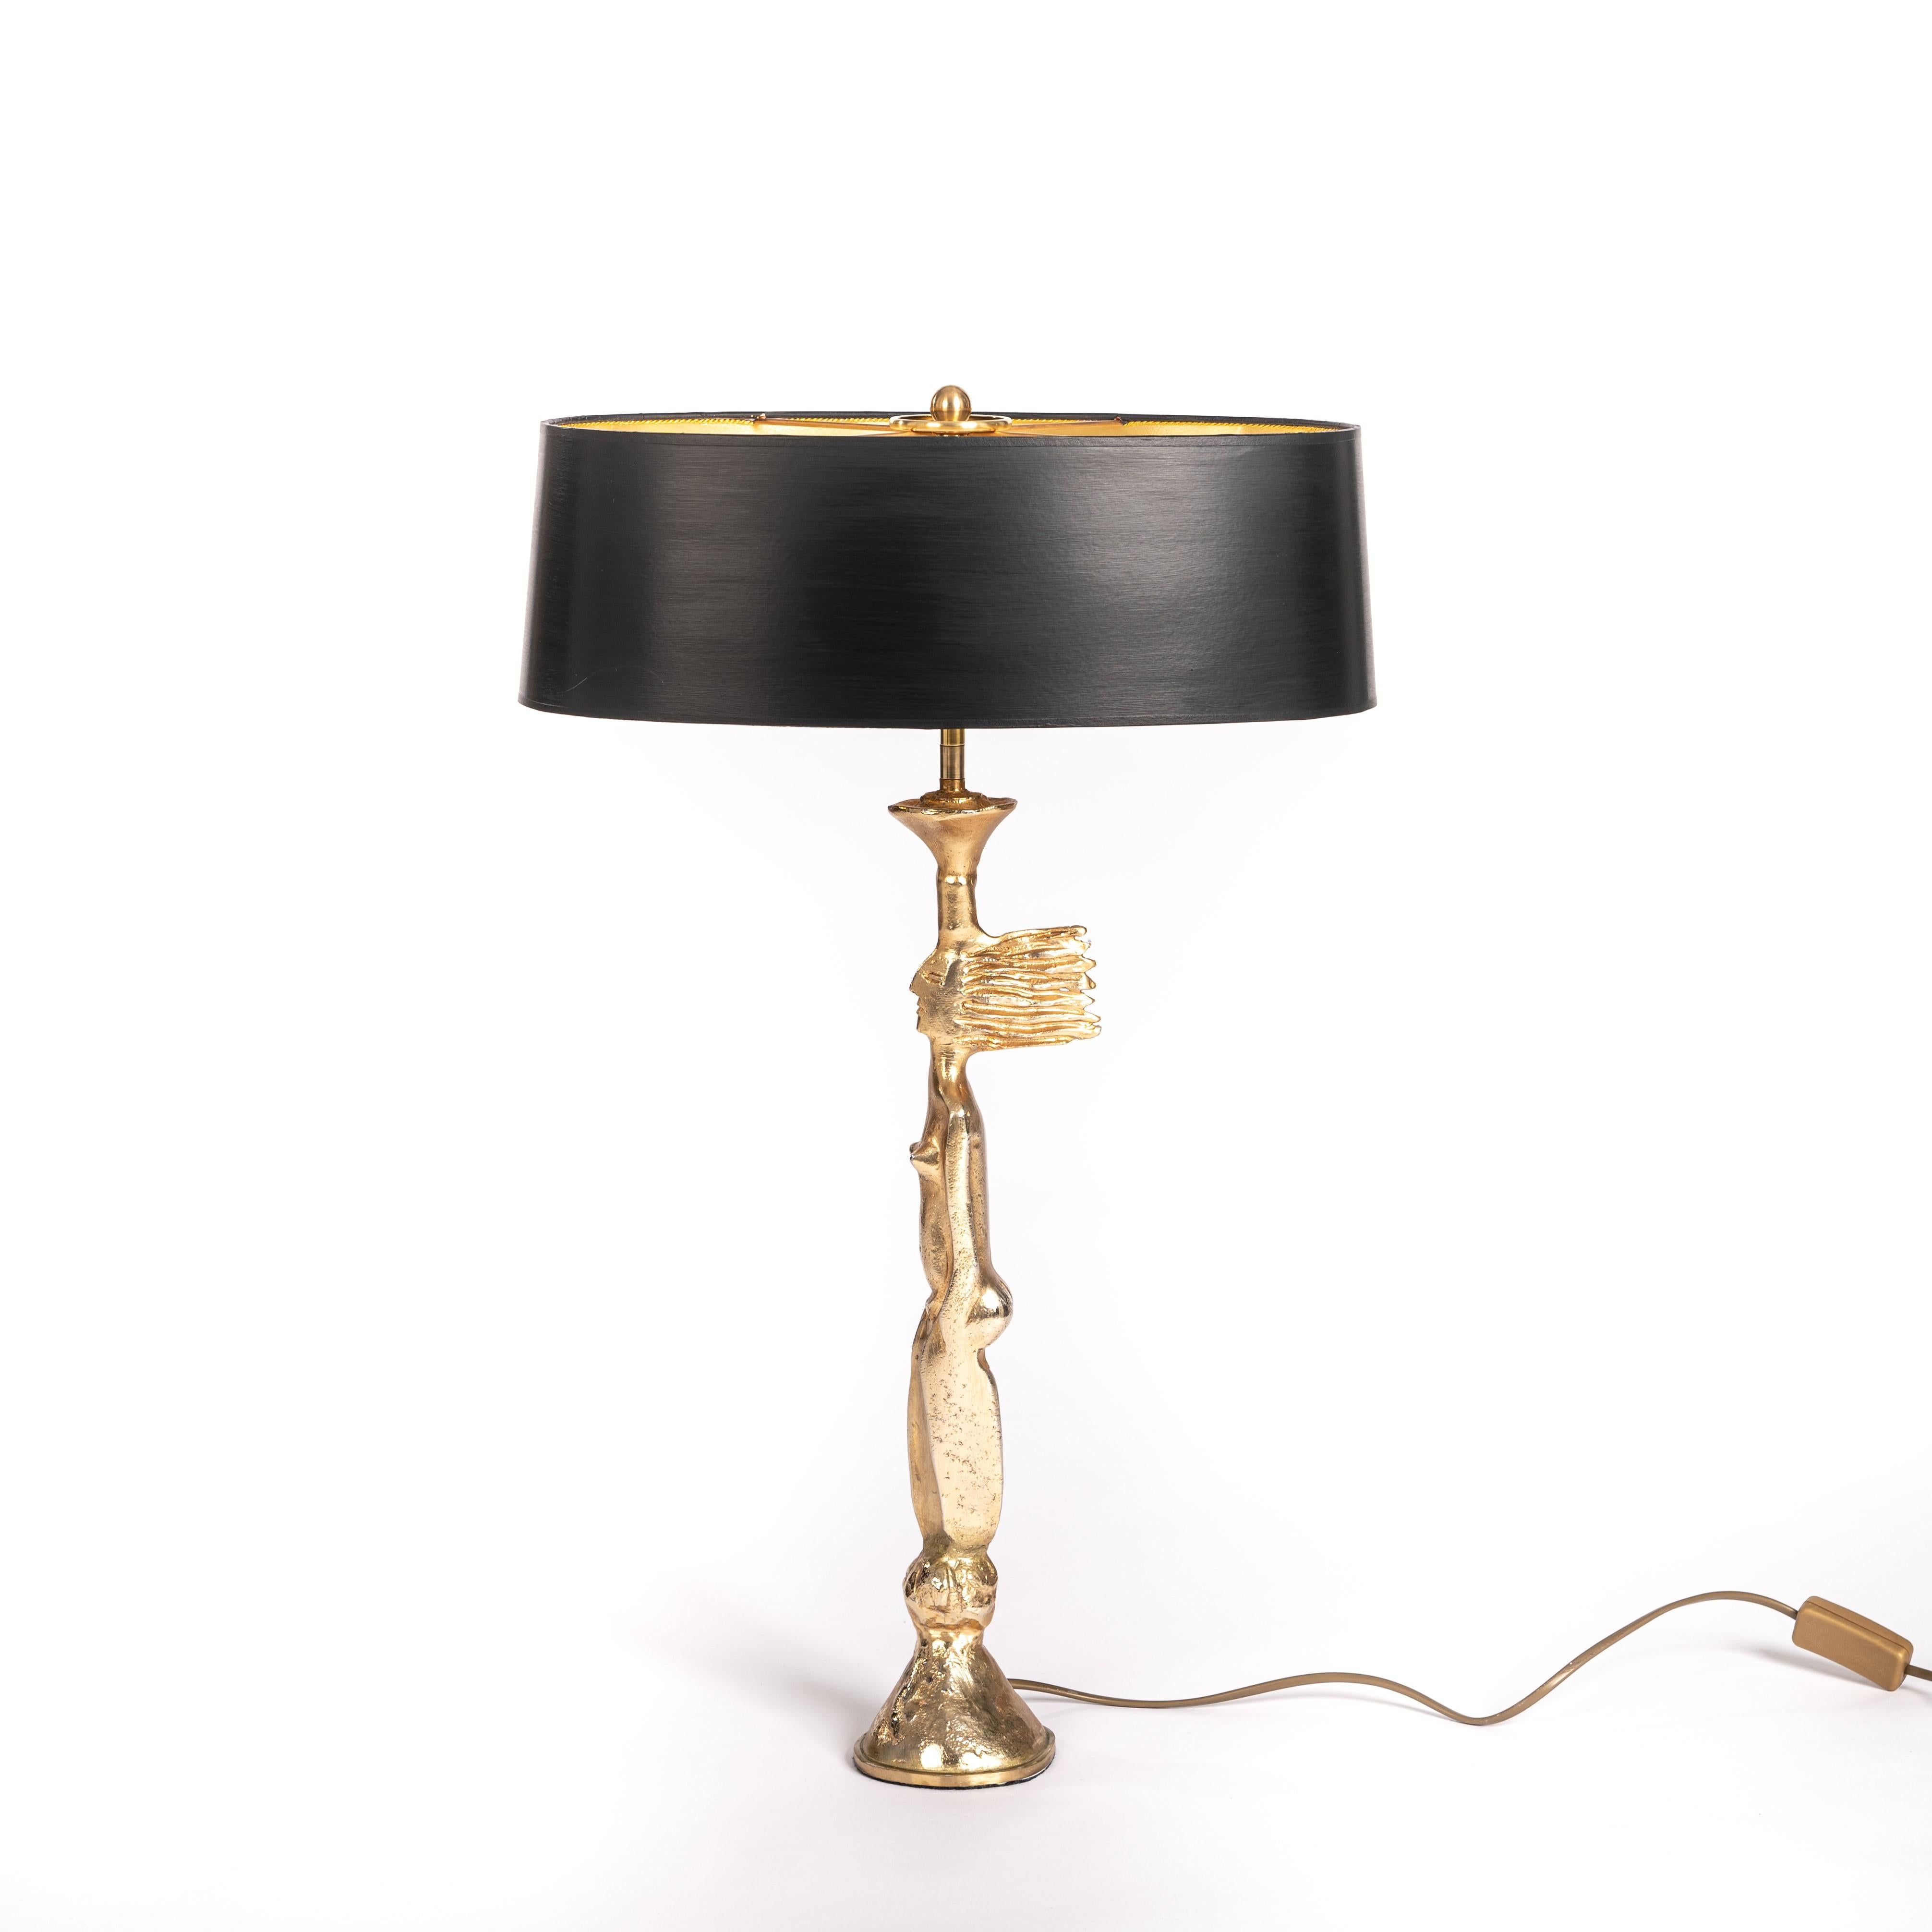 French Gilded Bronze Table Lamp by Pierre Casenove for Fondica, 1980s For Sale 8